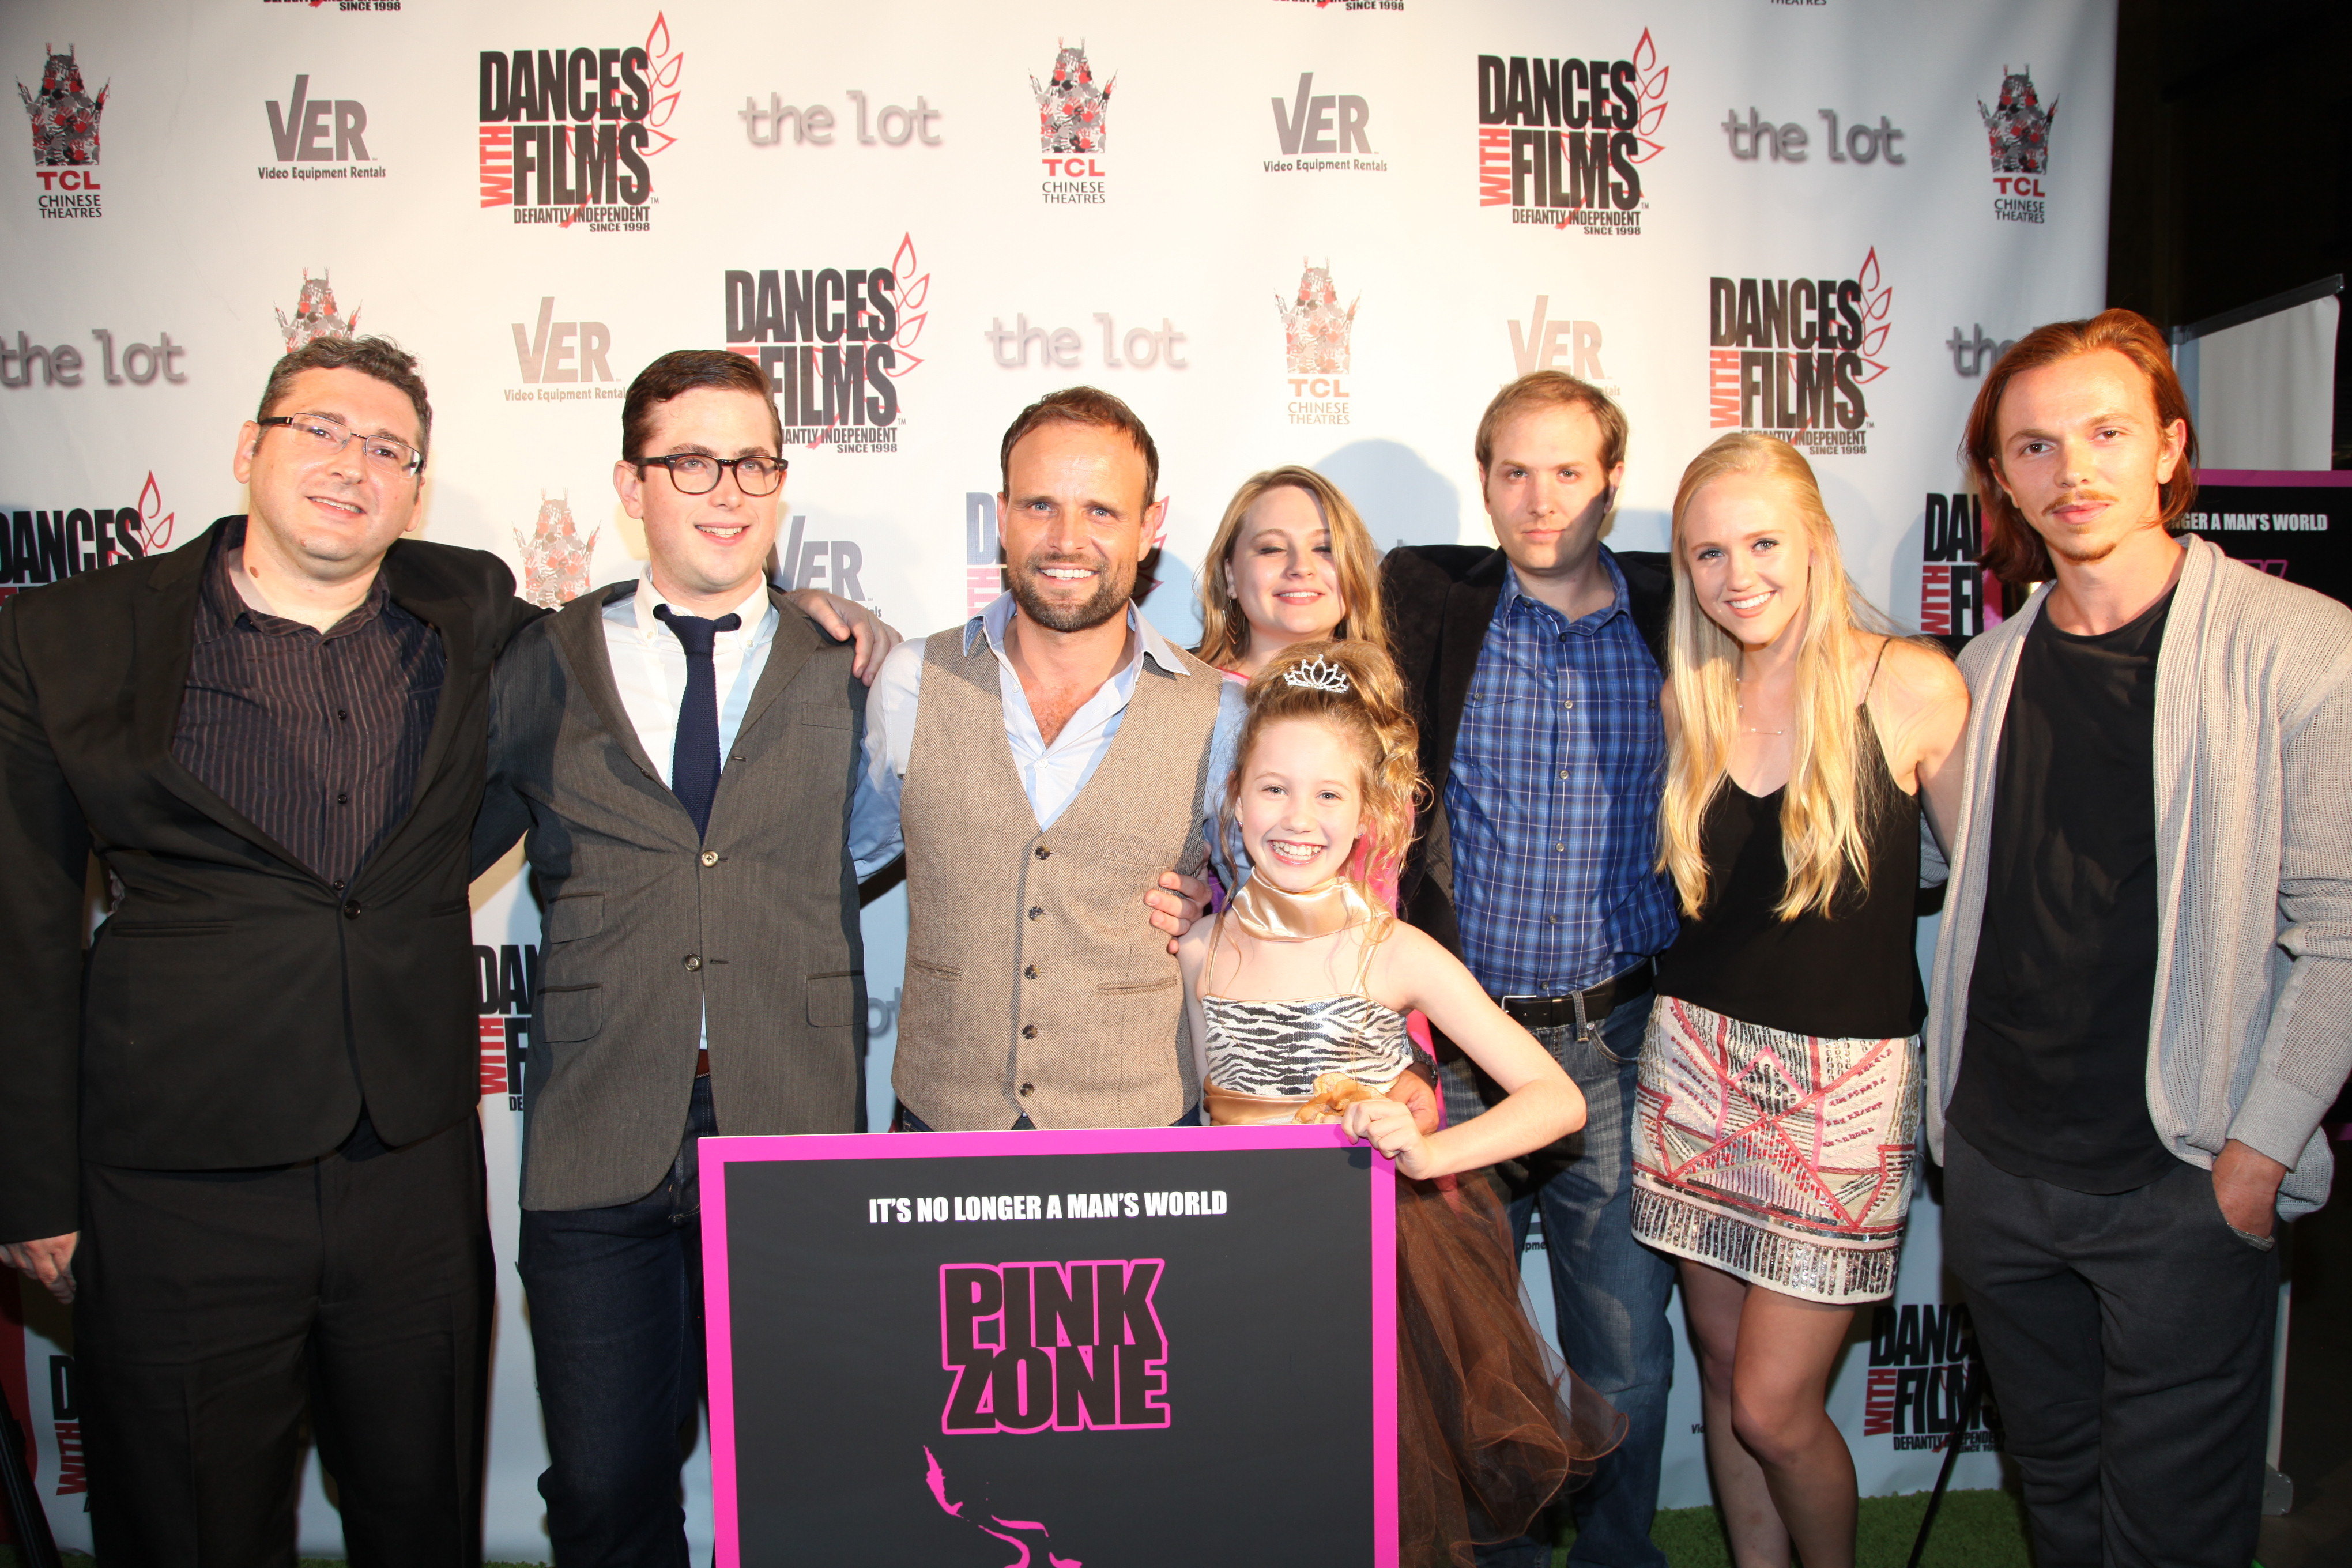 From left to right : Todd Bartoo, Benjamin Walter, Matt Cooper, Jayna Sweet, Ava Ames, Brandon Burrows, Courtney Welbon, Tiago Felizardo at the World Premiere of PINK ZONE at the Chinese Theatre.